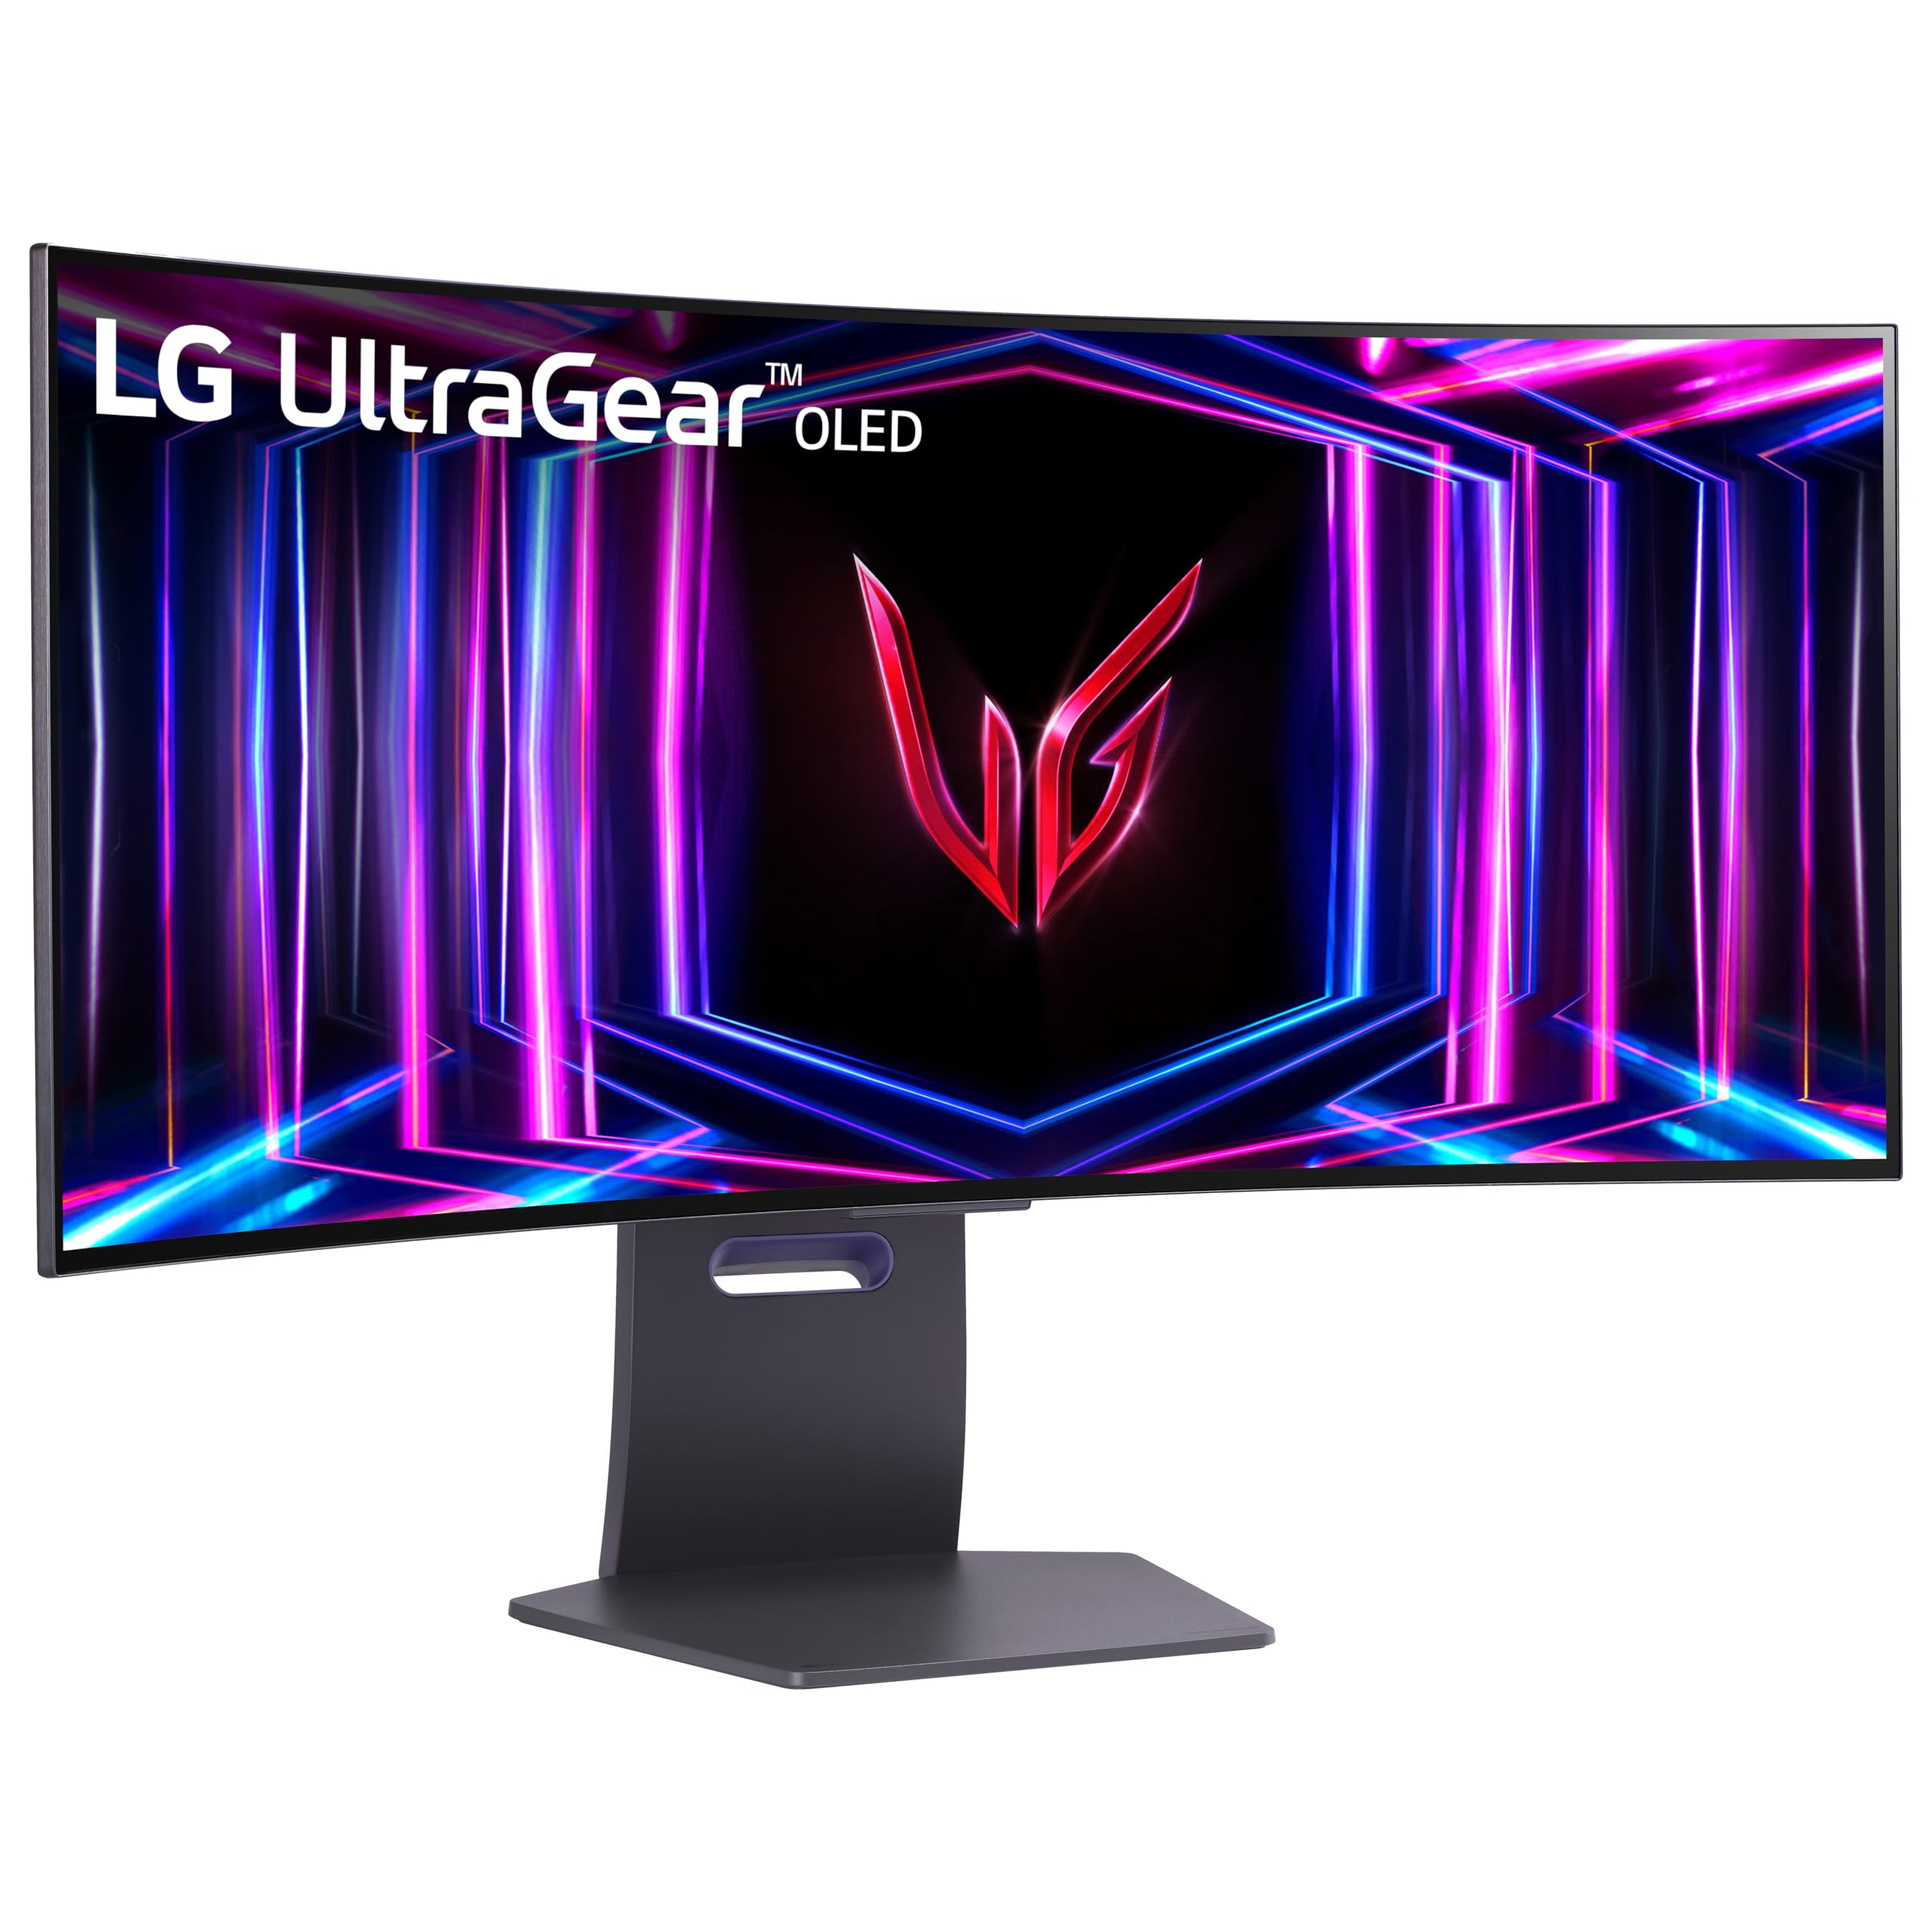 34GS95QE-B OLED 240Hz 800R Gaming Monitor at LG.COM $899.99 with code FLASH200 and free Gaming Pad